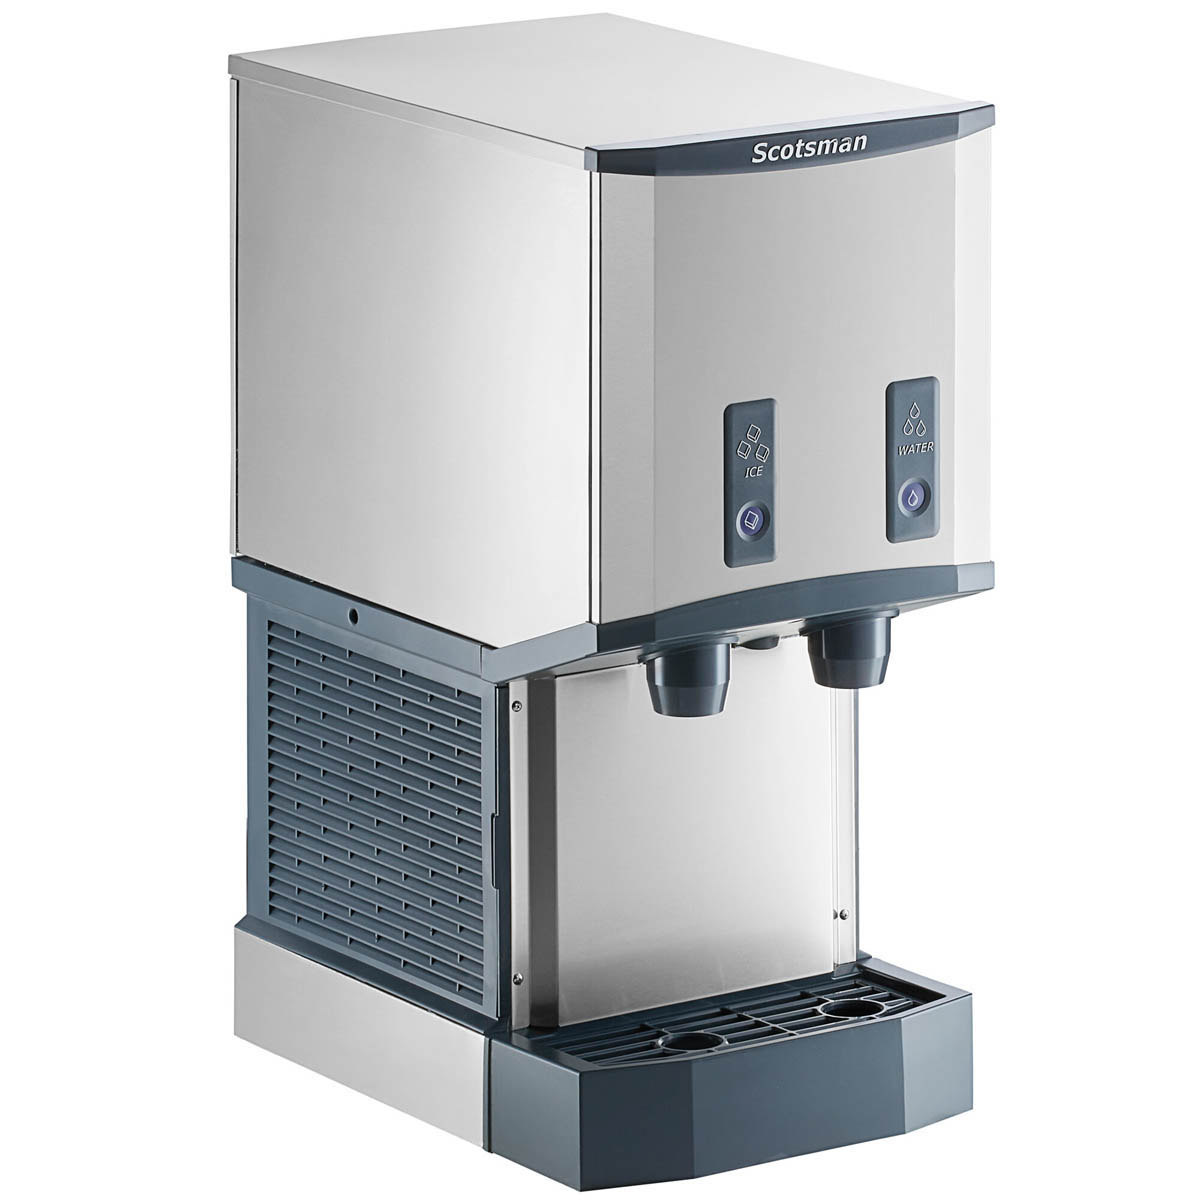 With Scotsman HID312AB-1 Easy to Serve Ice For Your Customers, Chef's Deal